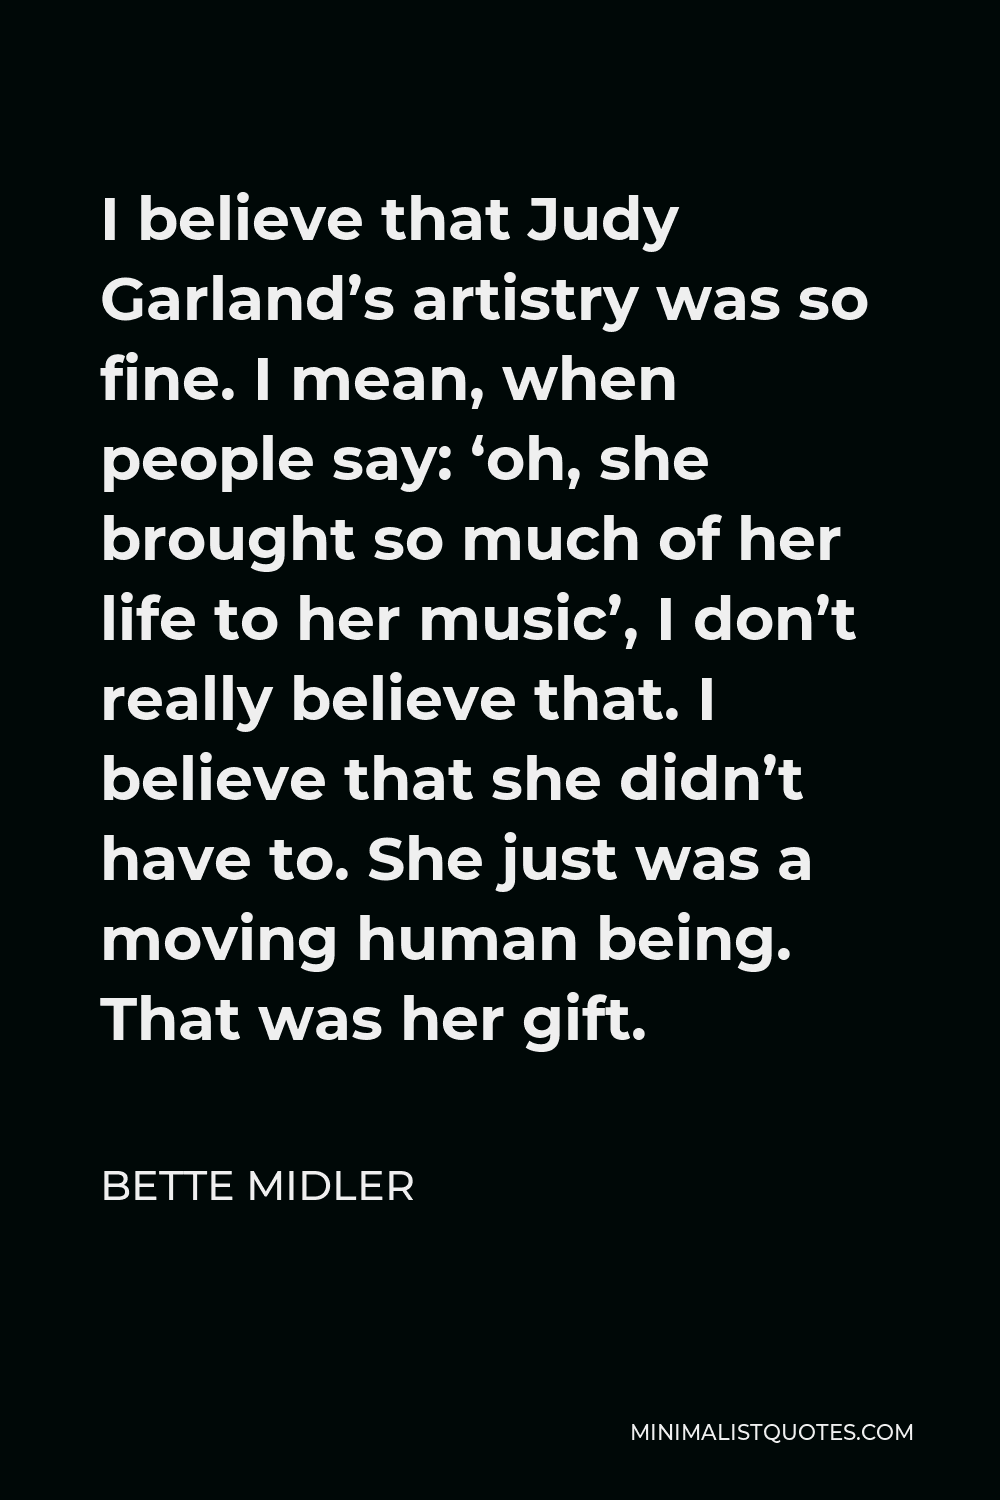 Bette Midler Quote - I believe that Judy Garland’s artistry was so fine. I mean, when people say: ‘oh, she brought so much of her life to her music’, I don’t really believe that. I believe that she didn’t have to. She just was a moving human being. That was her gift.